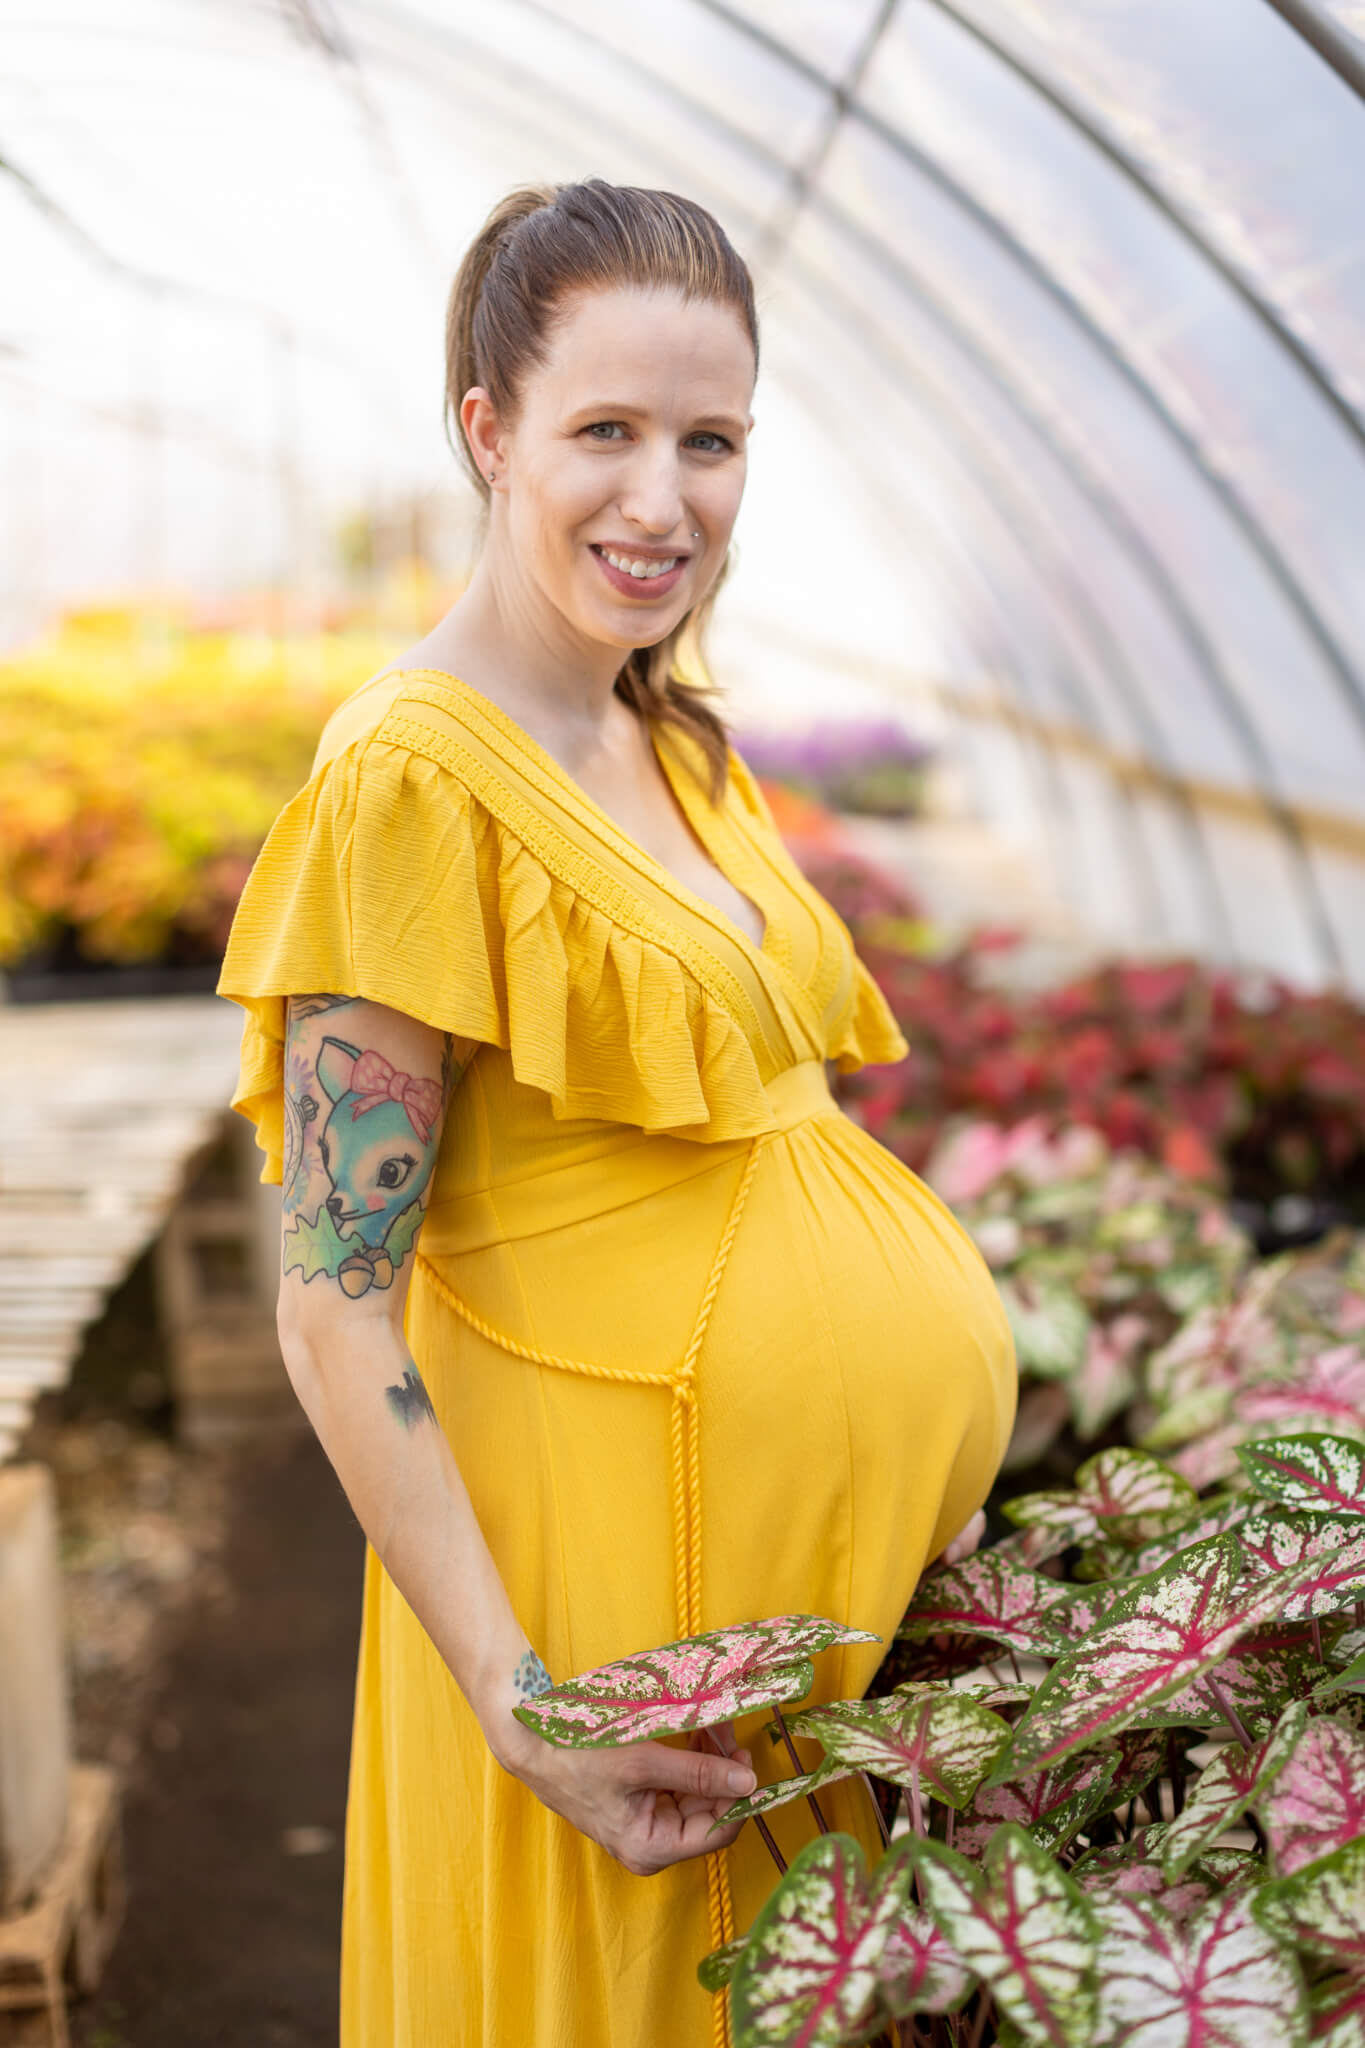 expecting mom playing with a new plant during her maternity session at the greenhouse. obgyn augusta ga